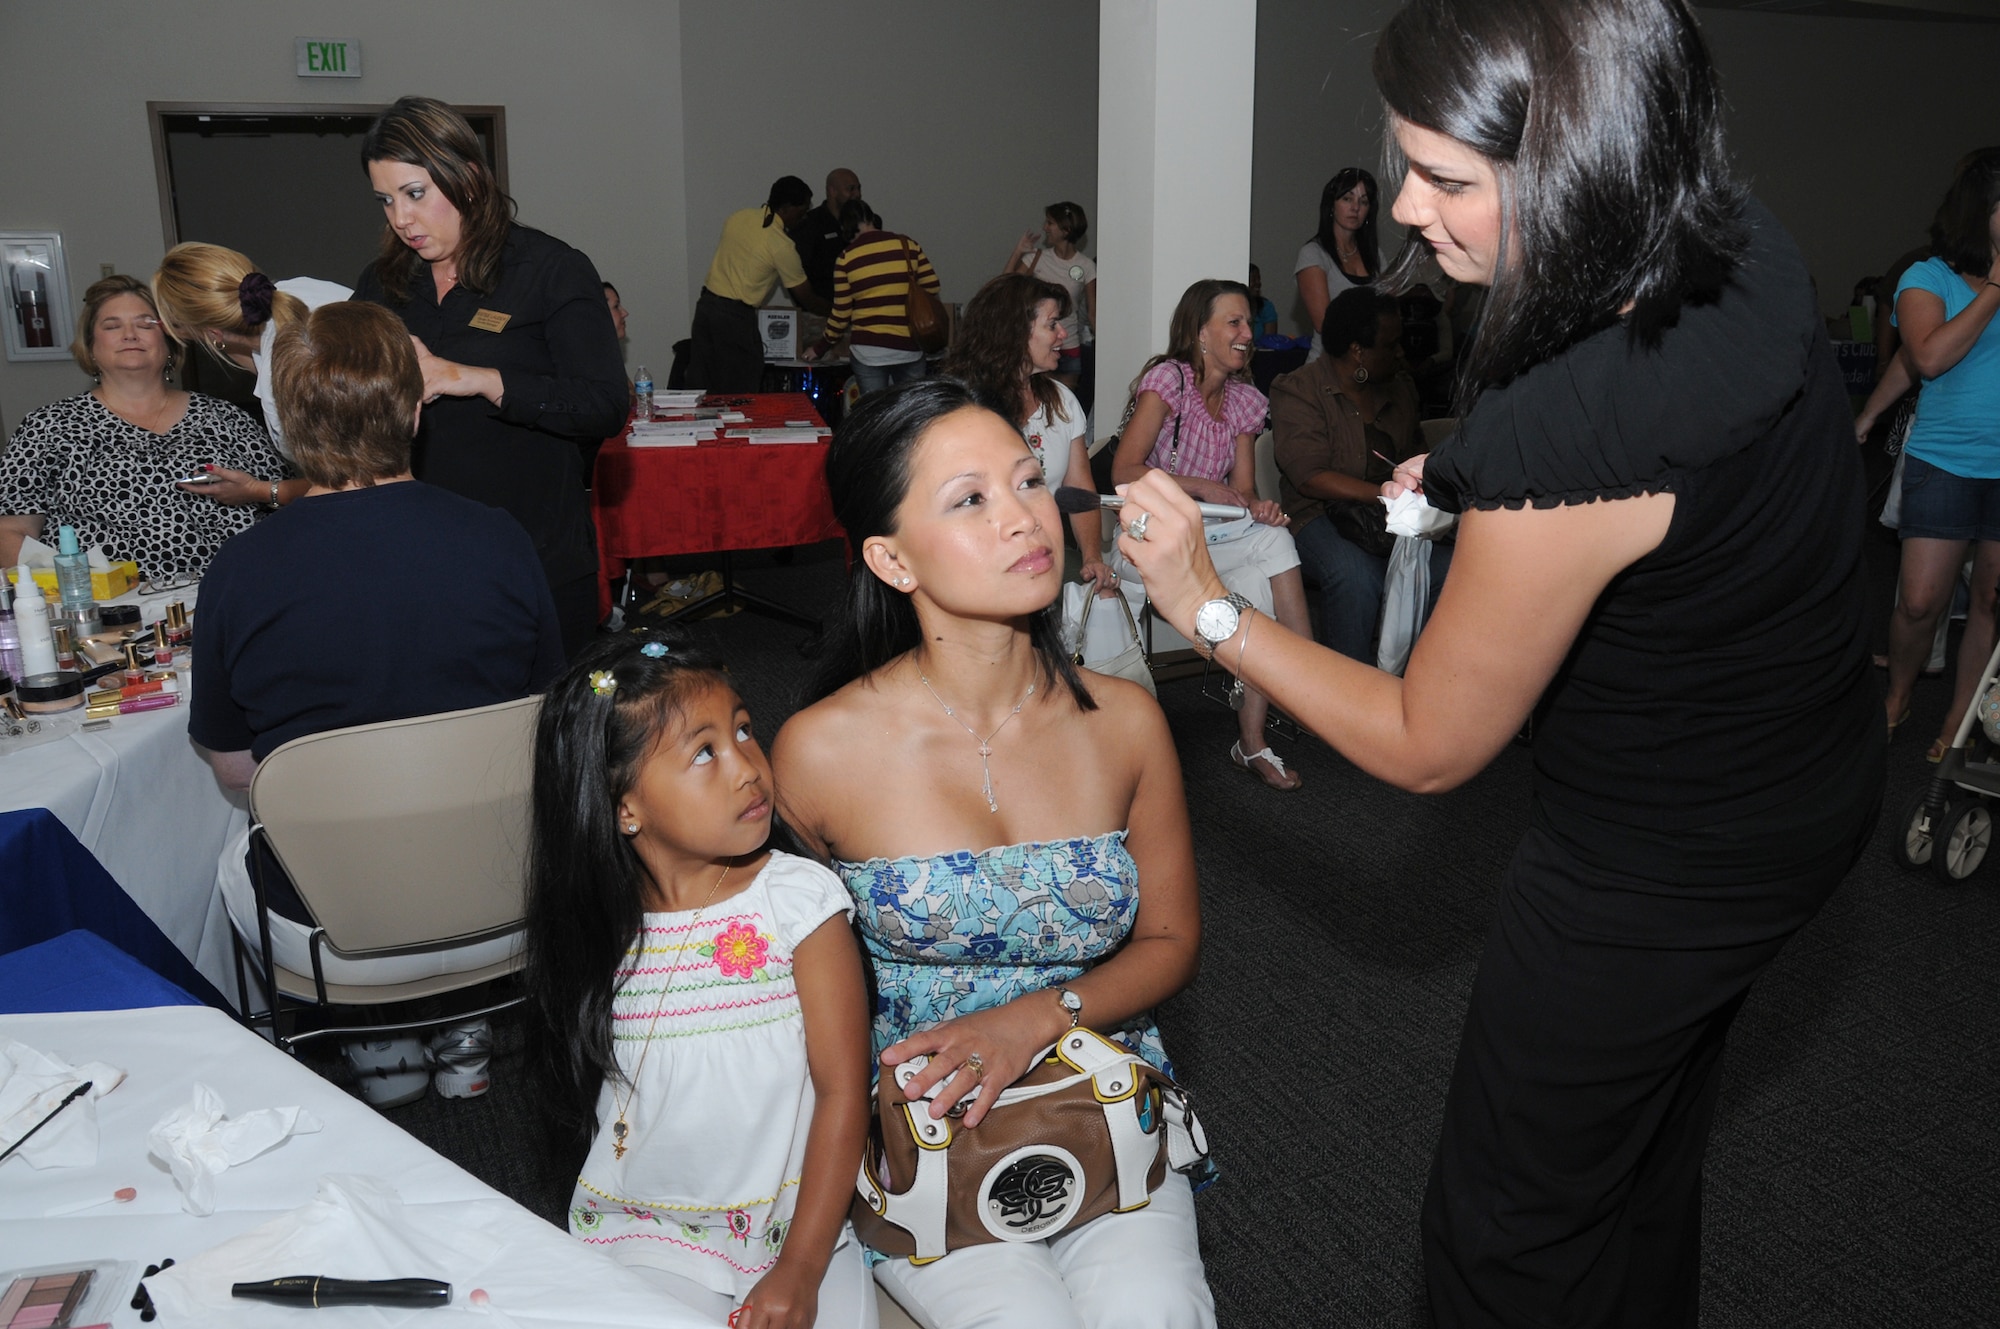 From left, Mialani Garcia, 5, watches her mom, Hannah Garcia, receive a makeover
from Jade Braccini, makeup artist at the base exchange. Ms. Garcia is the wife of
Master Chief Petty Officer David Garcia from the Seabee Base in Gulfport.  (U.S. Air Force photo by Kemberly Groue